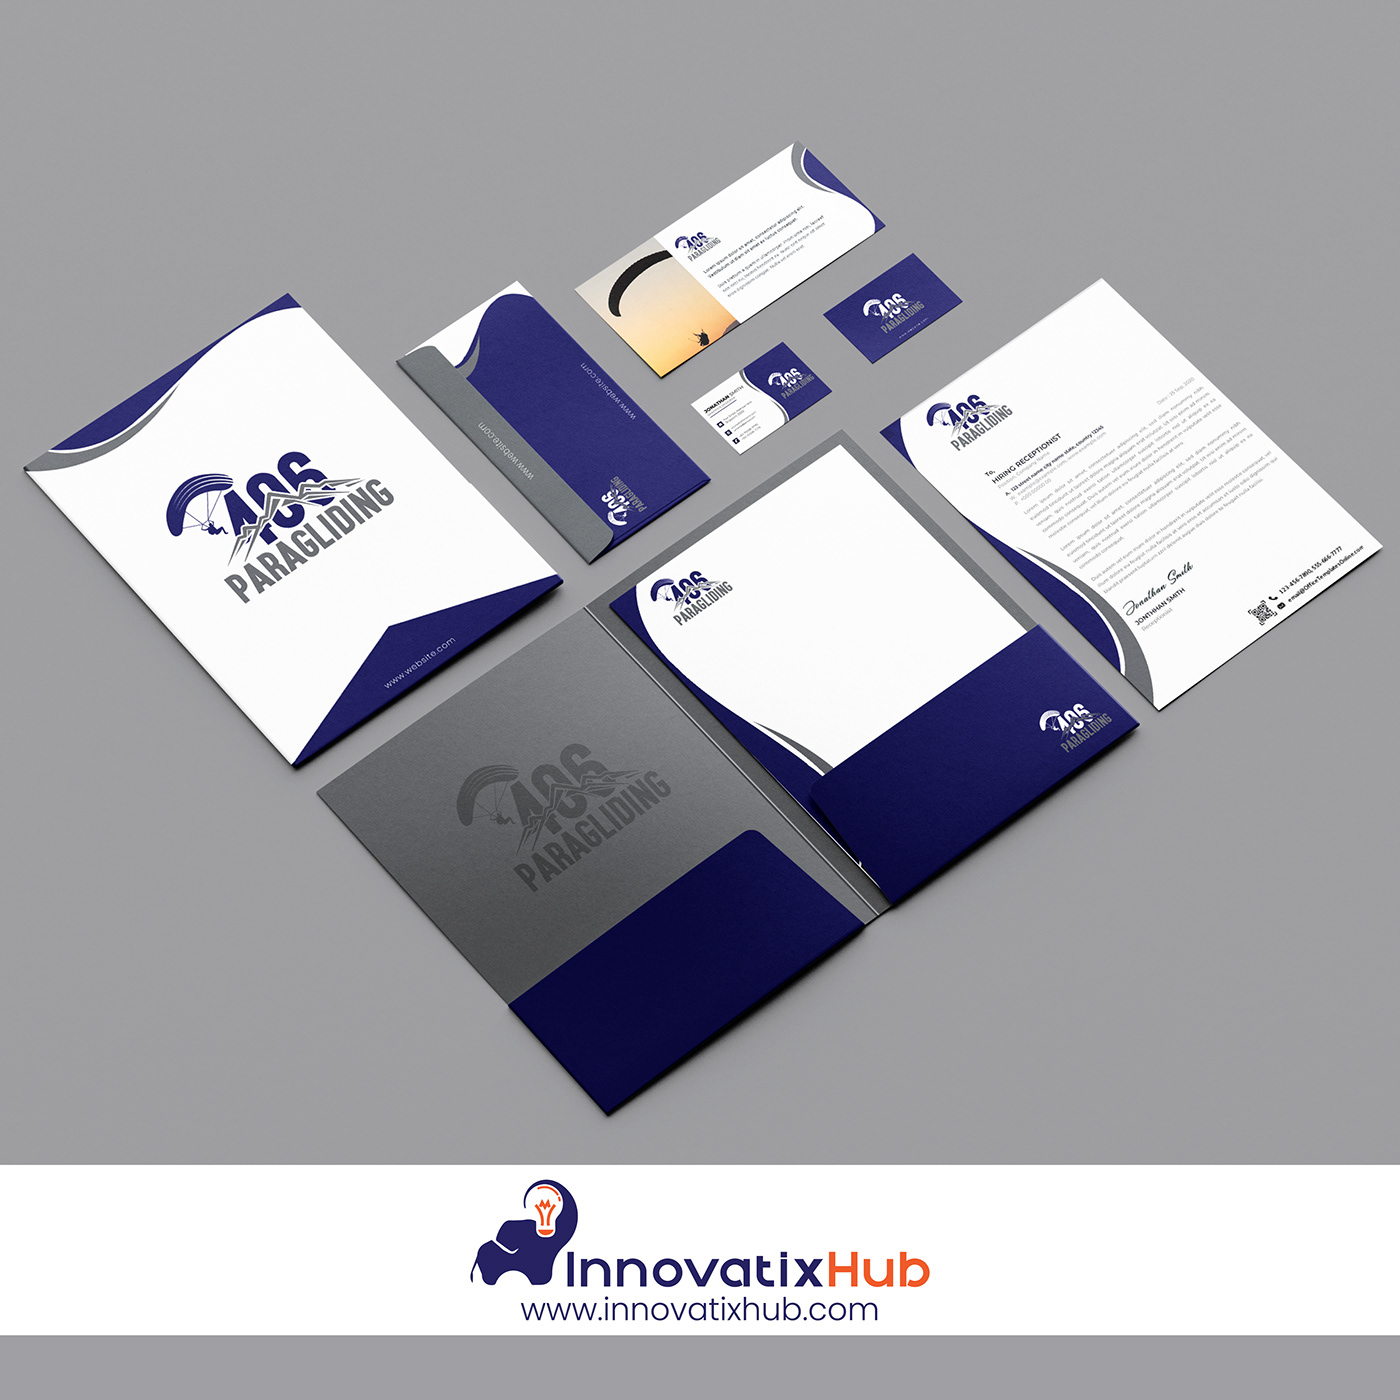 Soar above the competition with InnovatixHub's '406 Paragliding' logo design service!